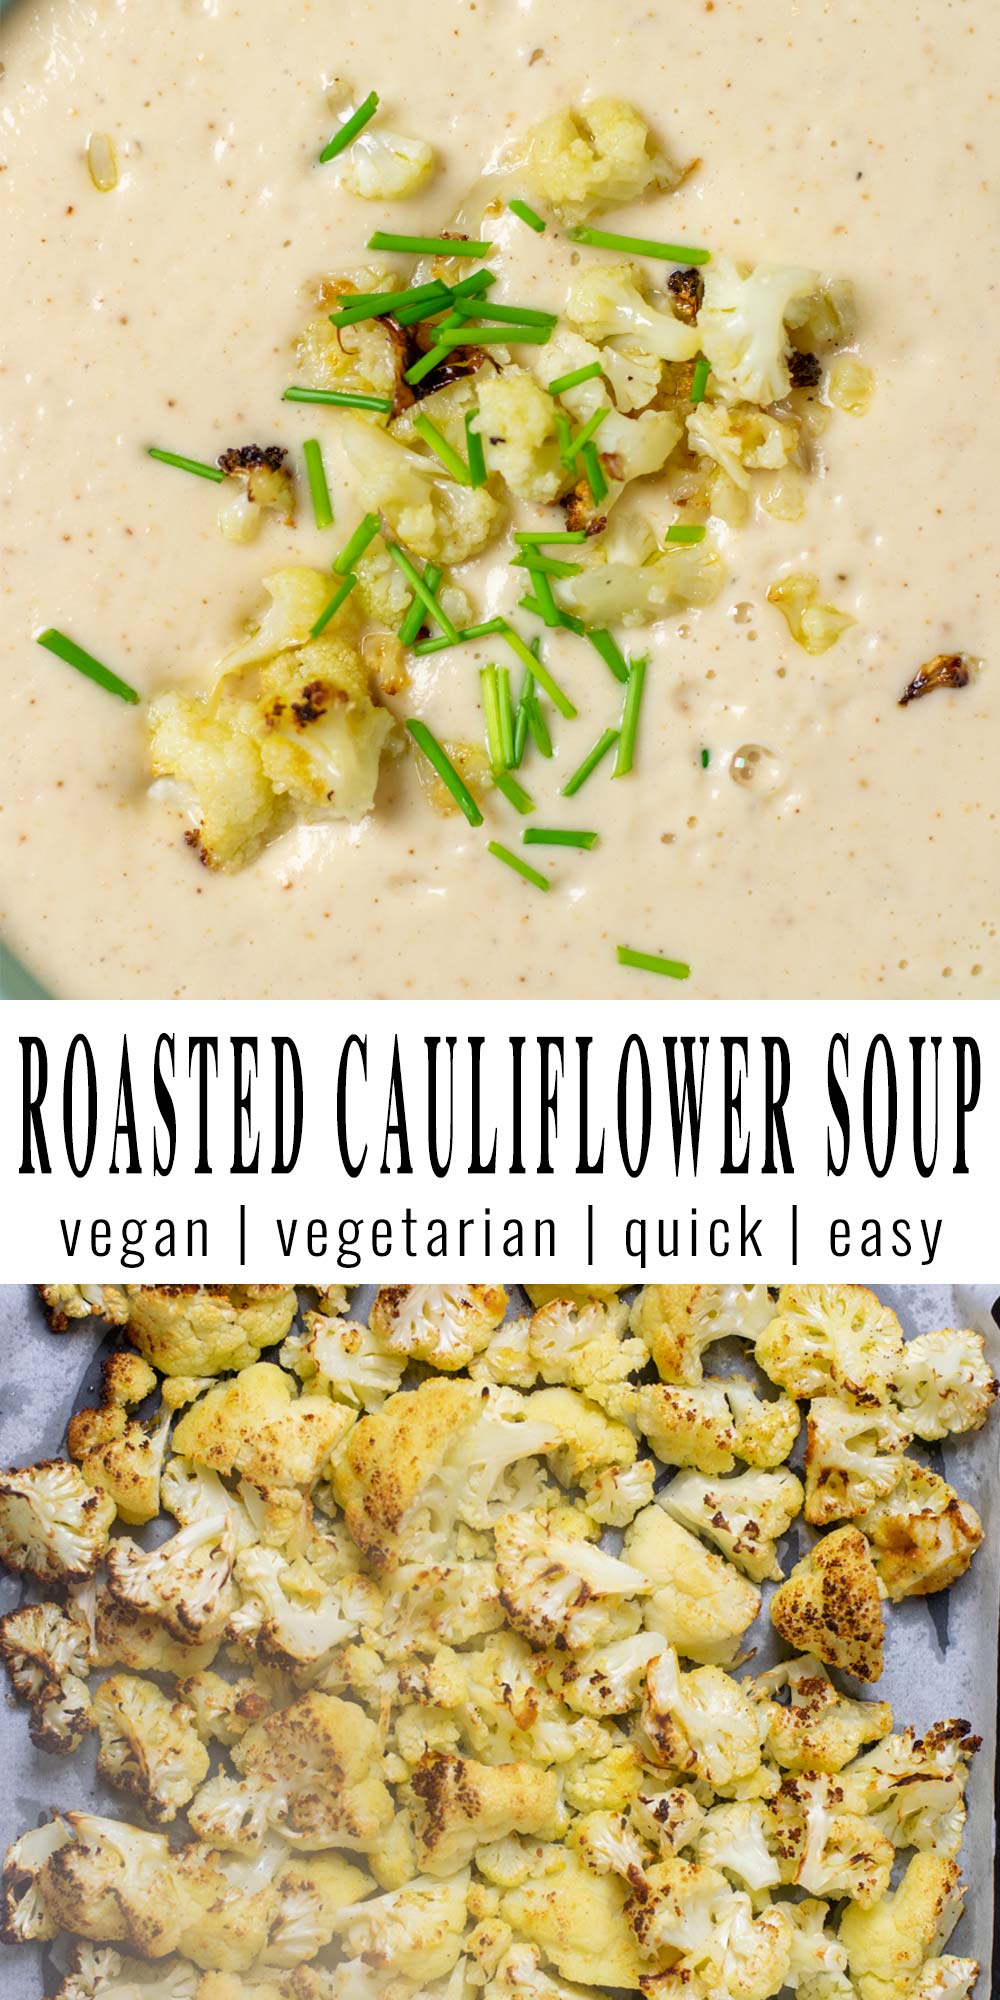 Collage of two pictures of the Roasted Cauliflower Soup with recipe title text.